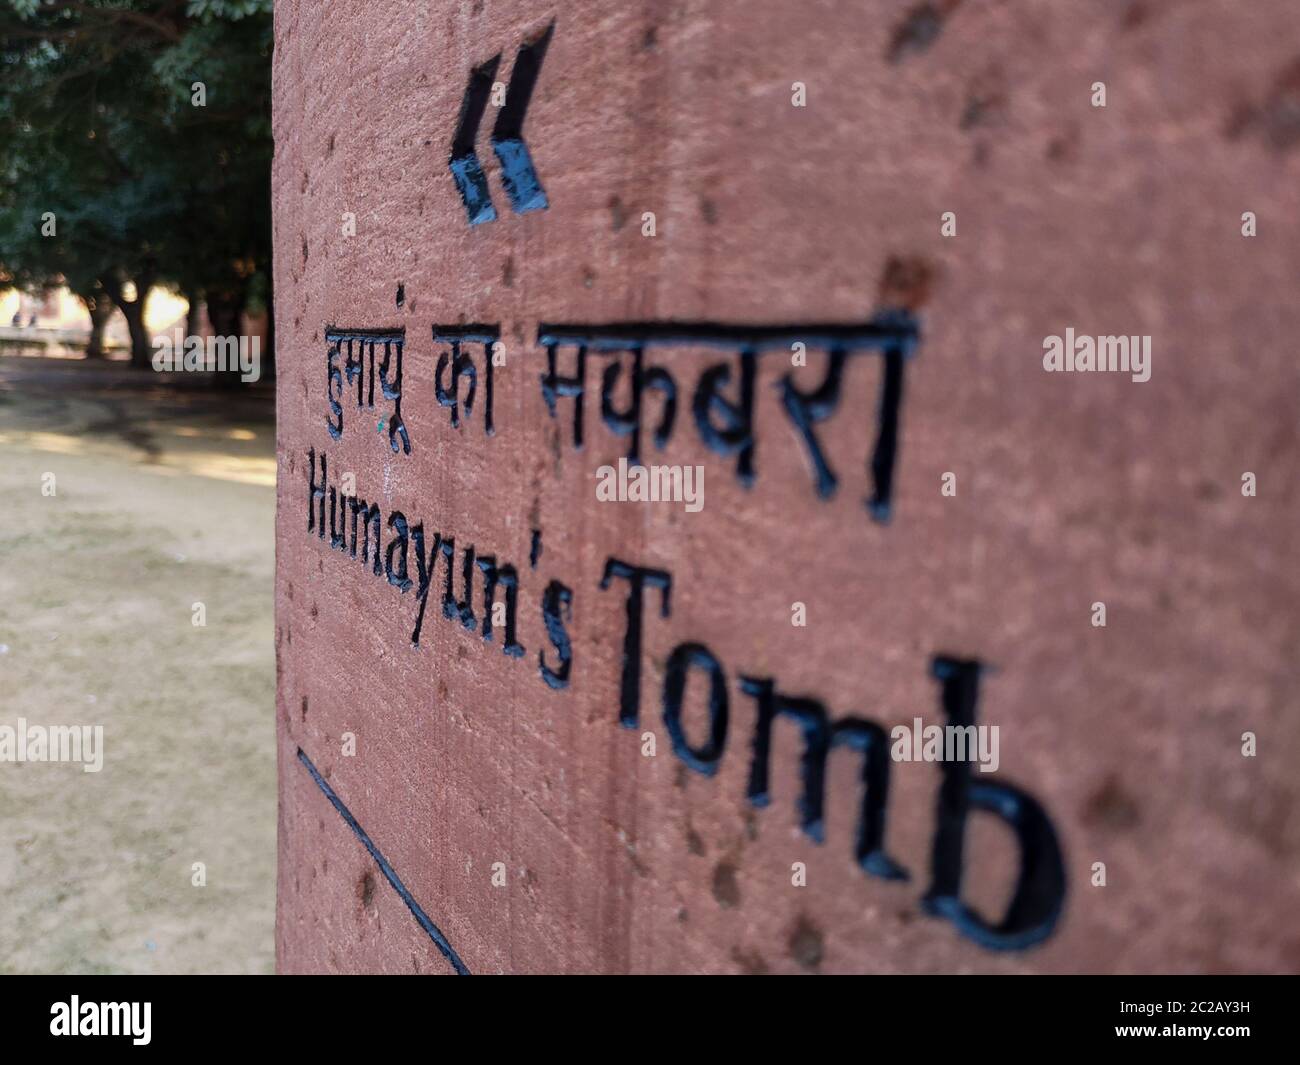 Editorial dated:11th february 2020 Location: Delhi India, Humayun's Tomb. Entry sign giving directions. Stock Photo